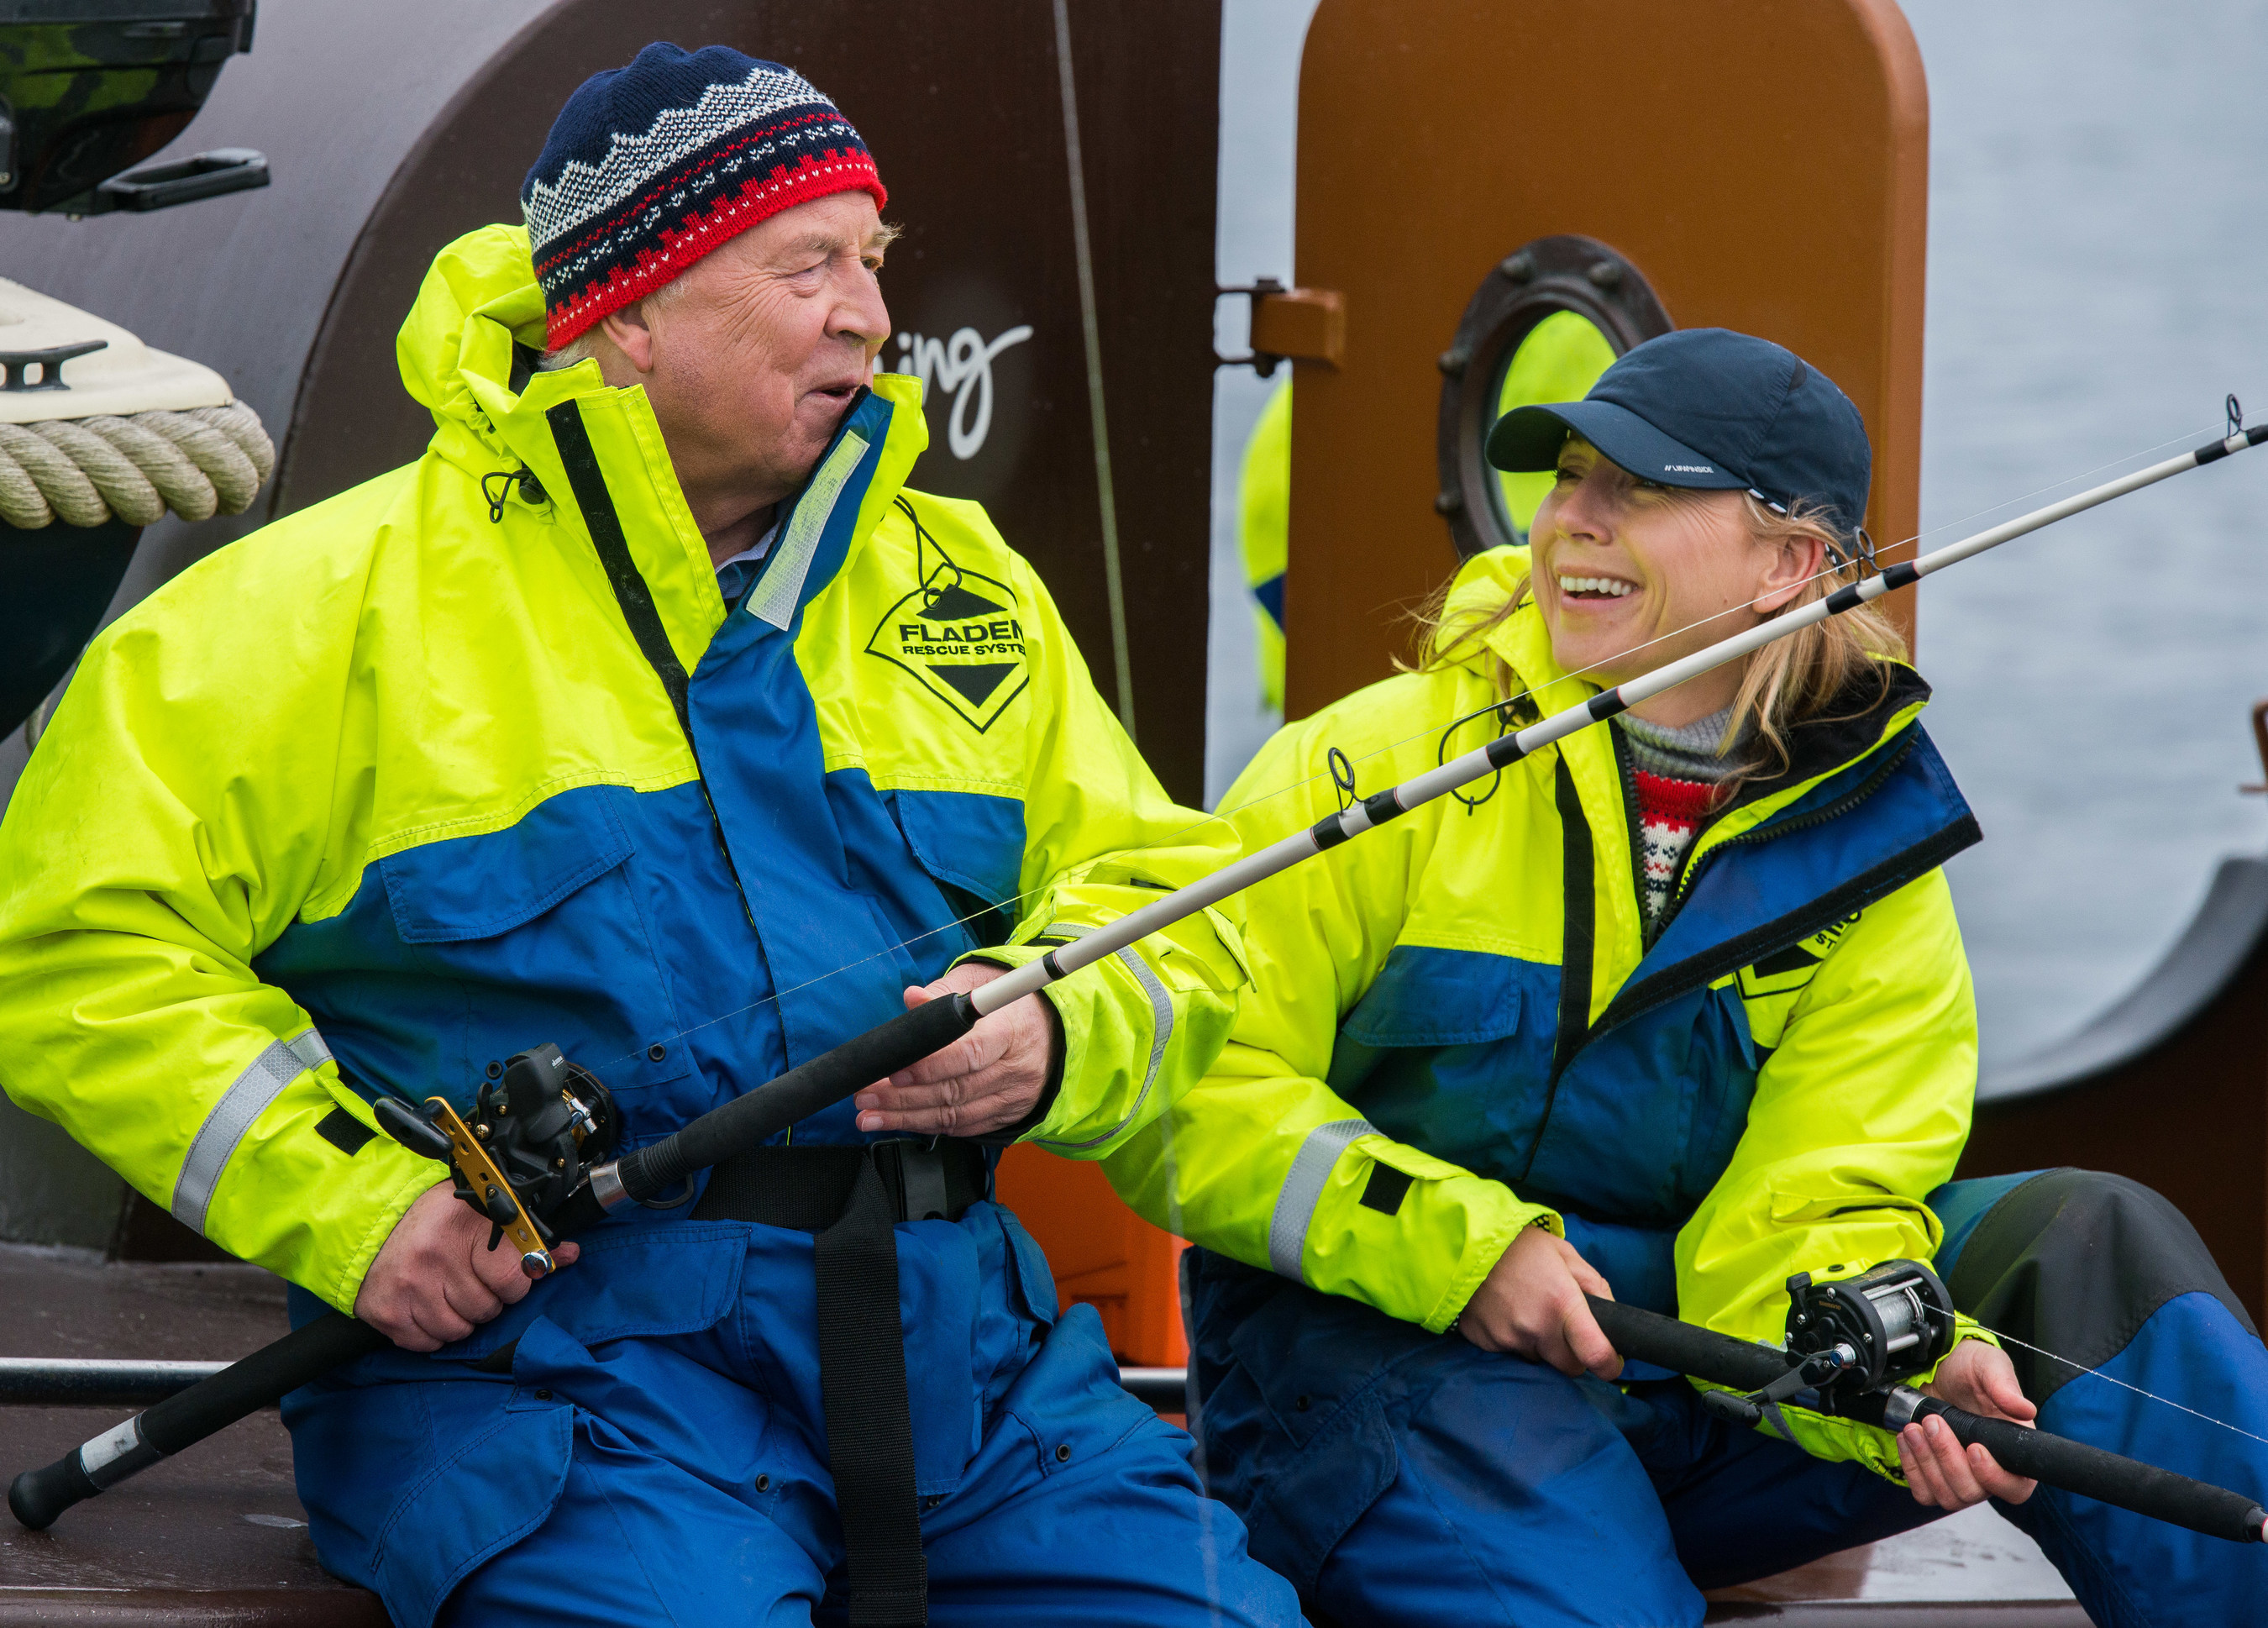 Viking Cruises founder and chairman Torstein Hagen and his daughter, Karine Hagen, fishing off the coast of Norway. Torstein Hagen, who is a Norwegian native, was visiting the touring the country to commemorate the arrival of the company's new ship, Viking Sea, in five new Norwegian ports of call. Karine Hagen, who serves as Senior Vice President at Viking, is also the godmother of Viking Sea.